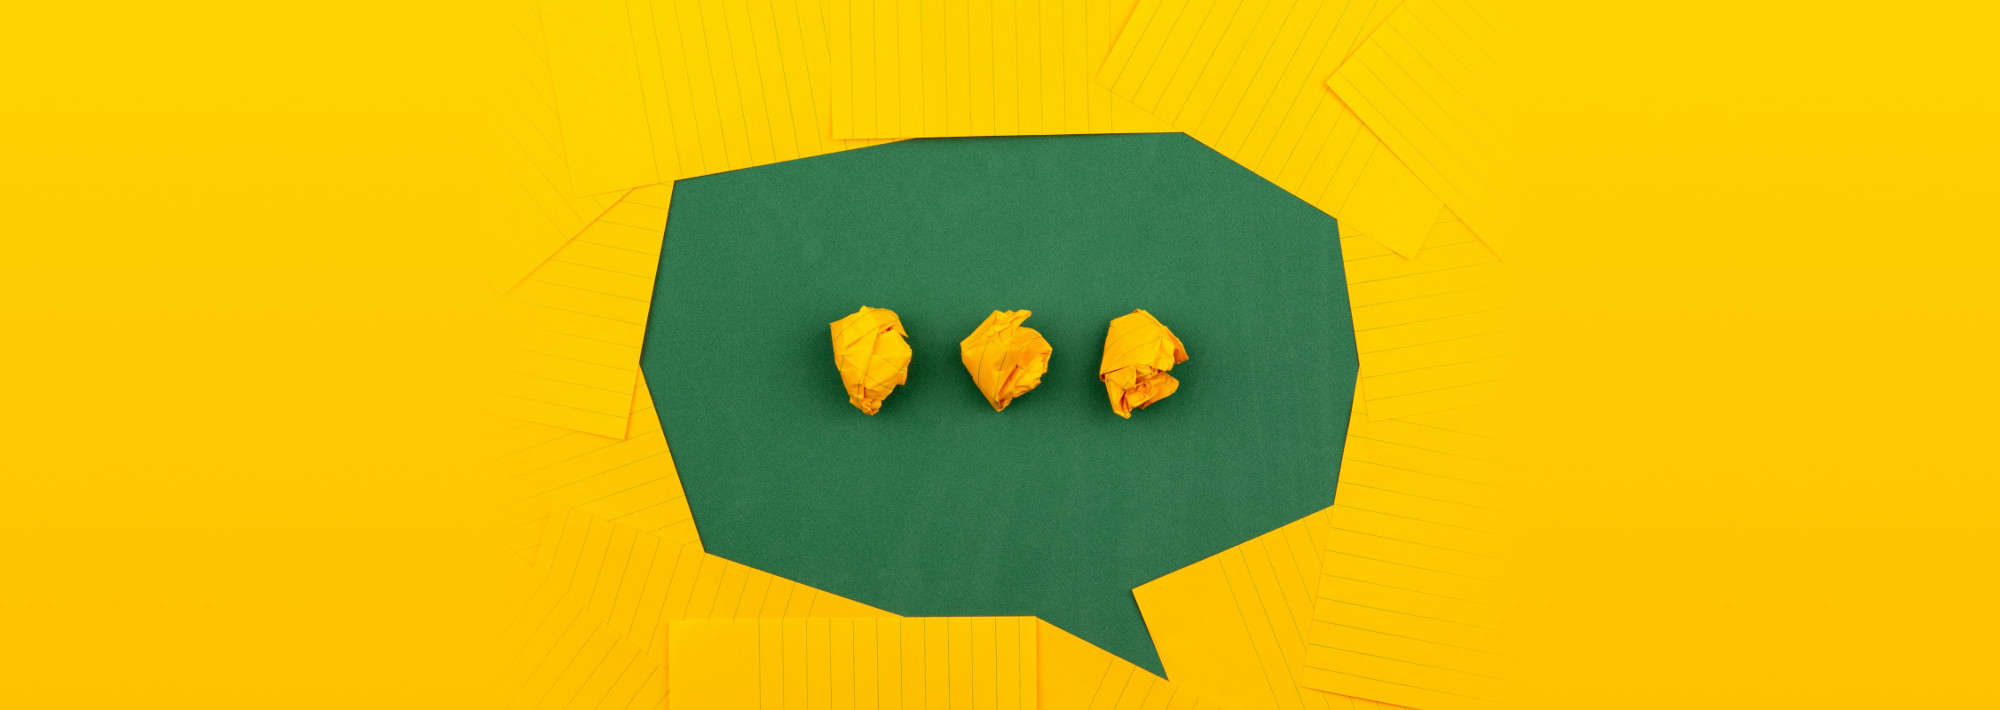 Orange sheets of paper lie on a green school board and form a chat bubble with three crumpled papers.